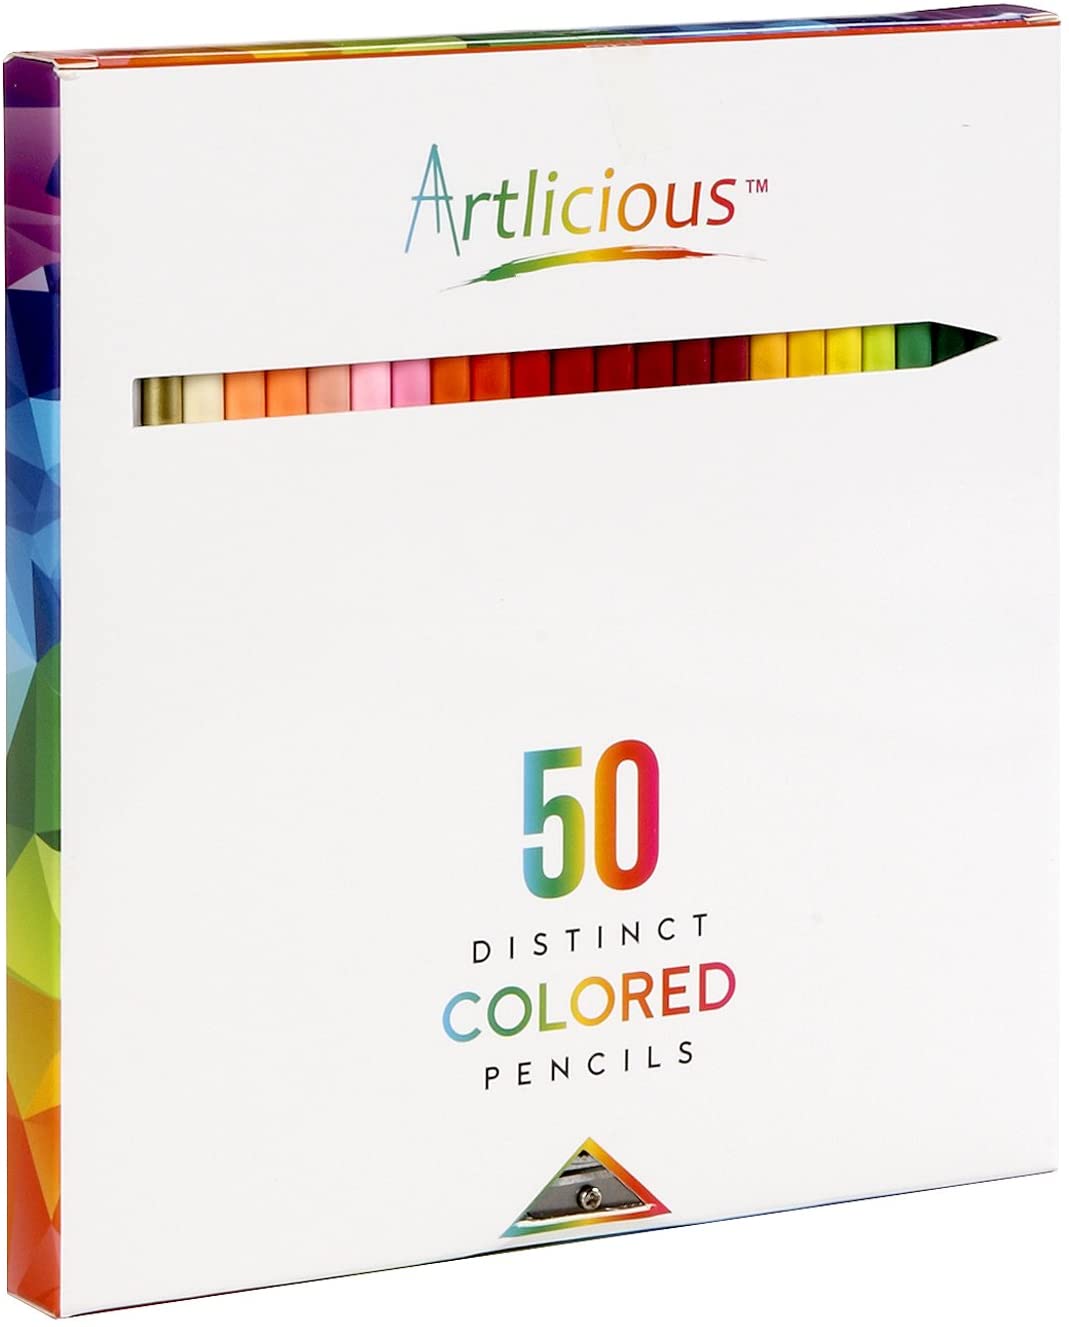 Artlicious Soft Lead Colored Pencils, 50-Count